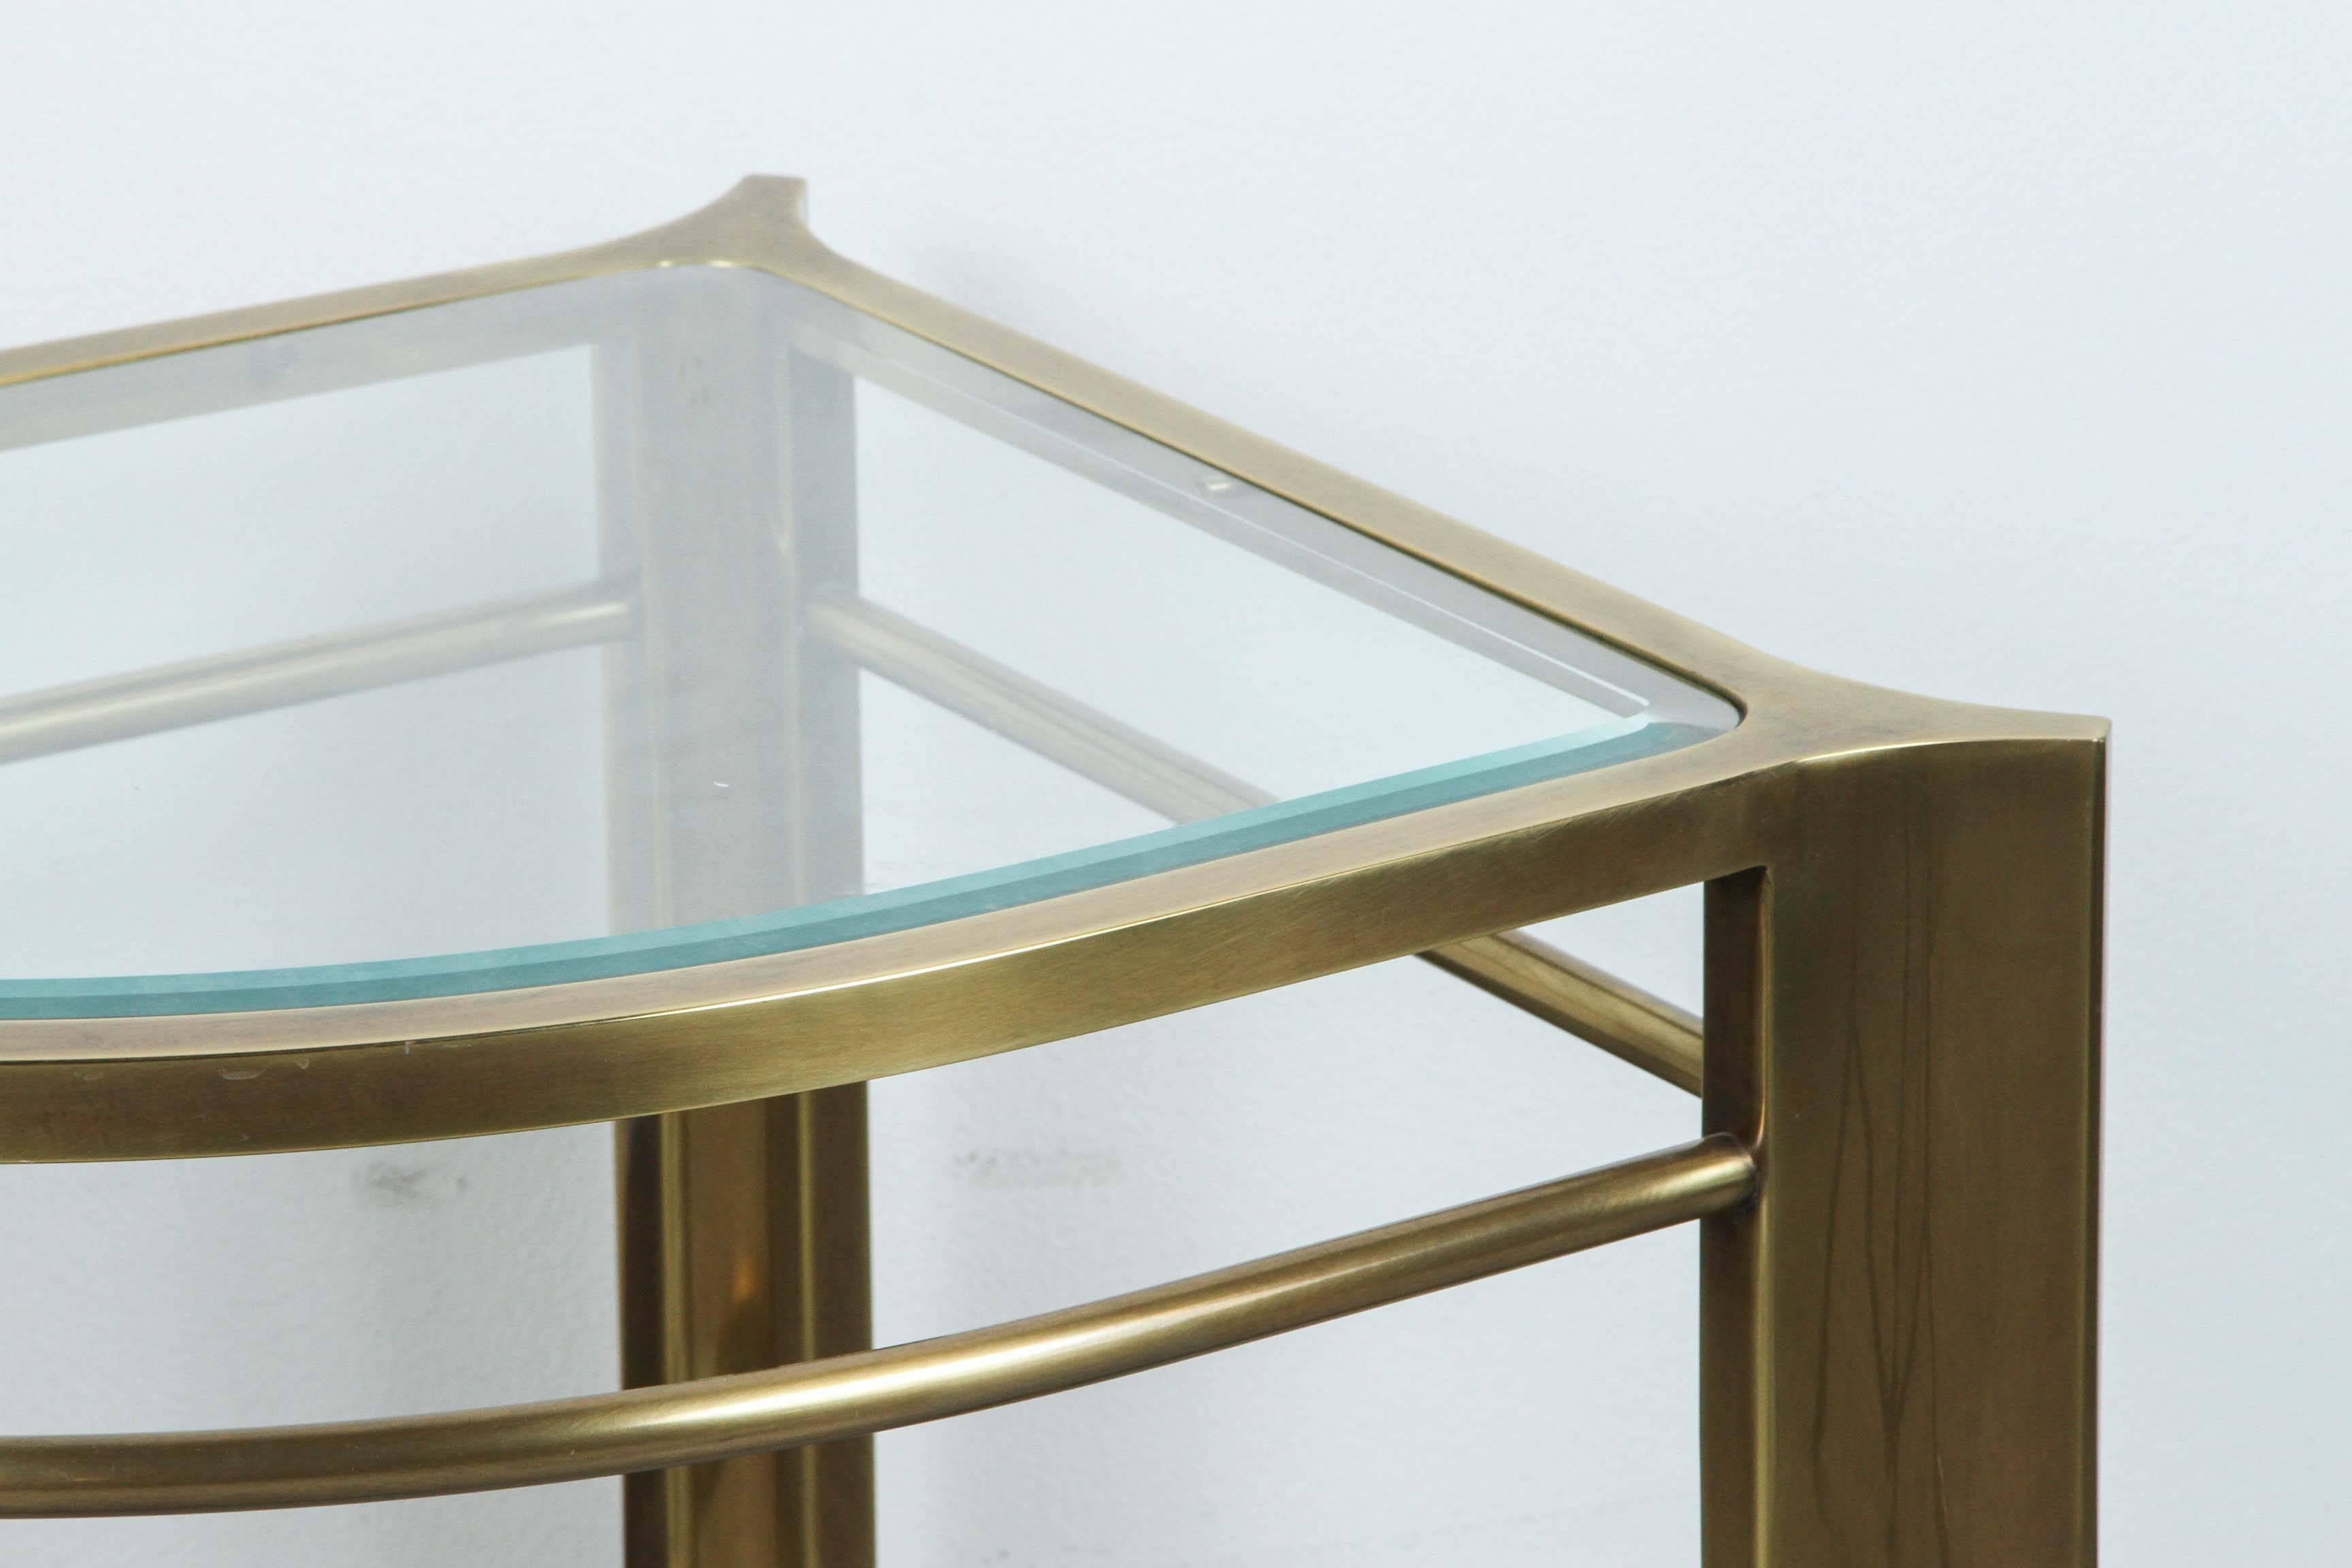 Rare brass and glass corner table by Mastercraft.
The golden / brass frame supports a glass top which is inset.